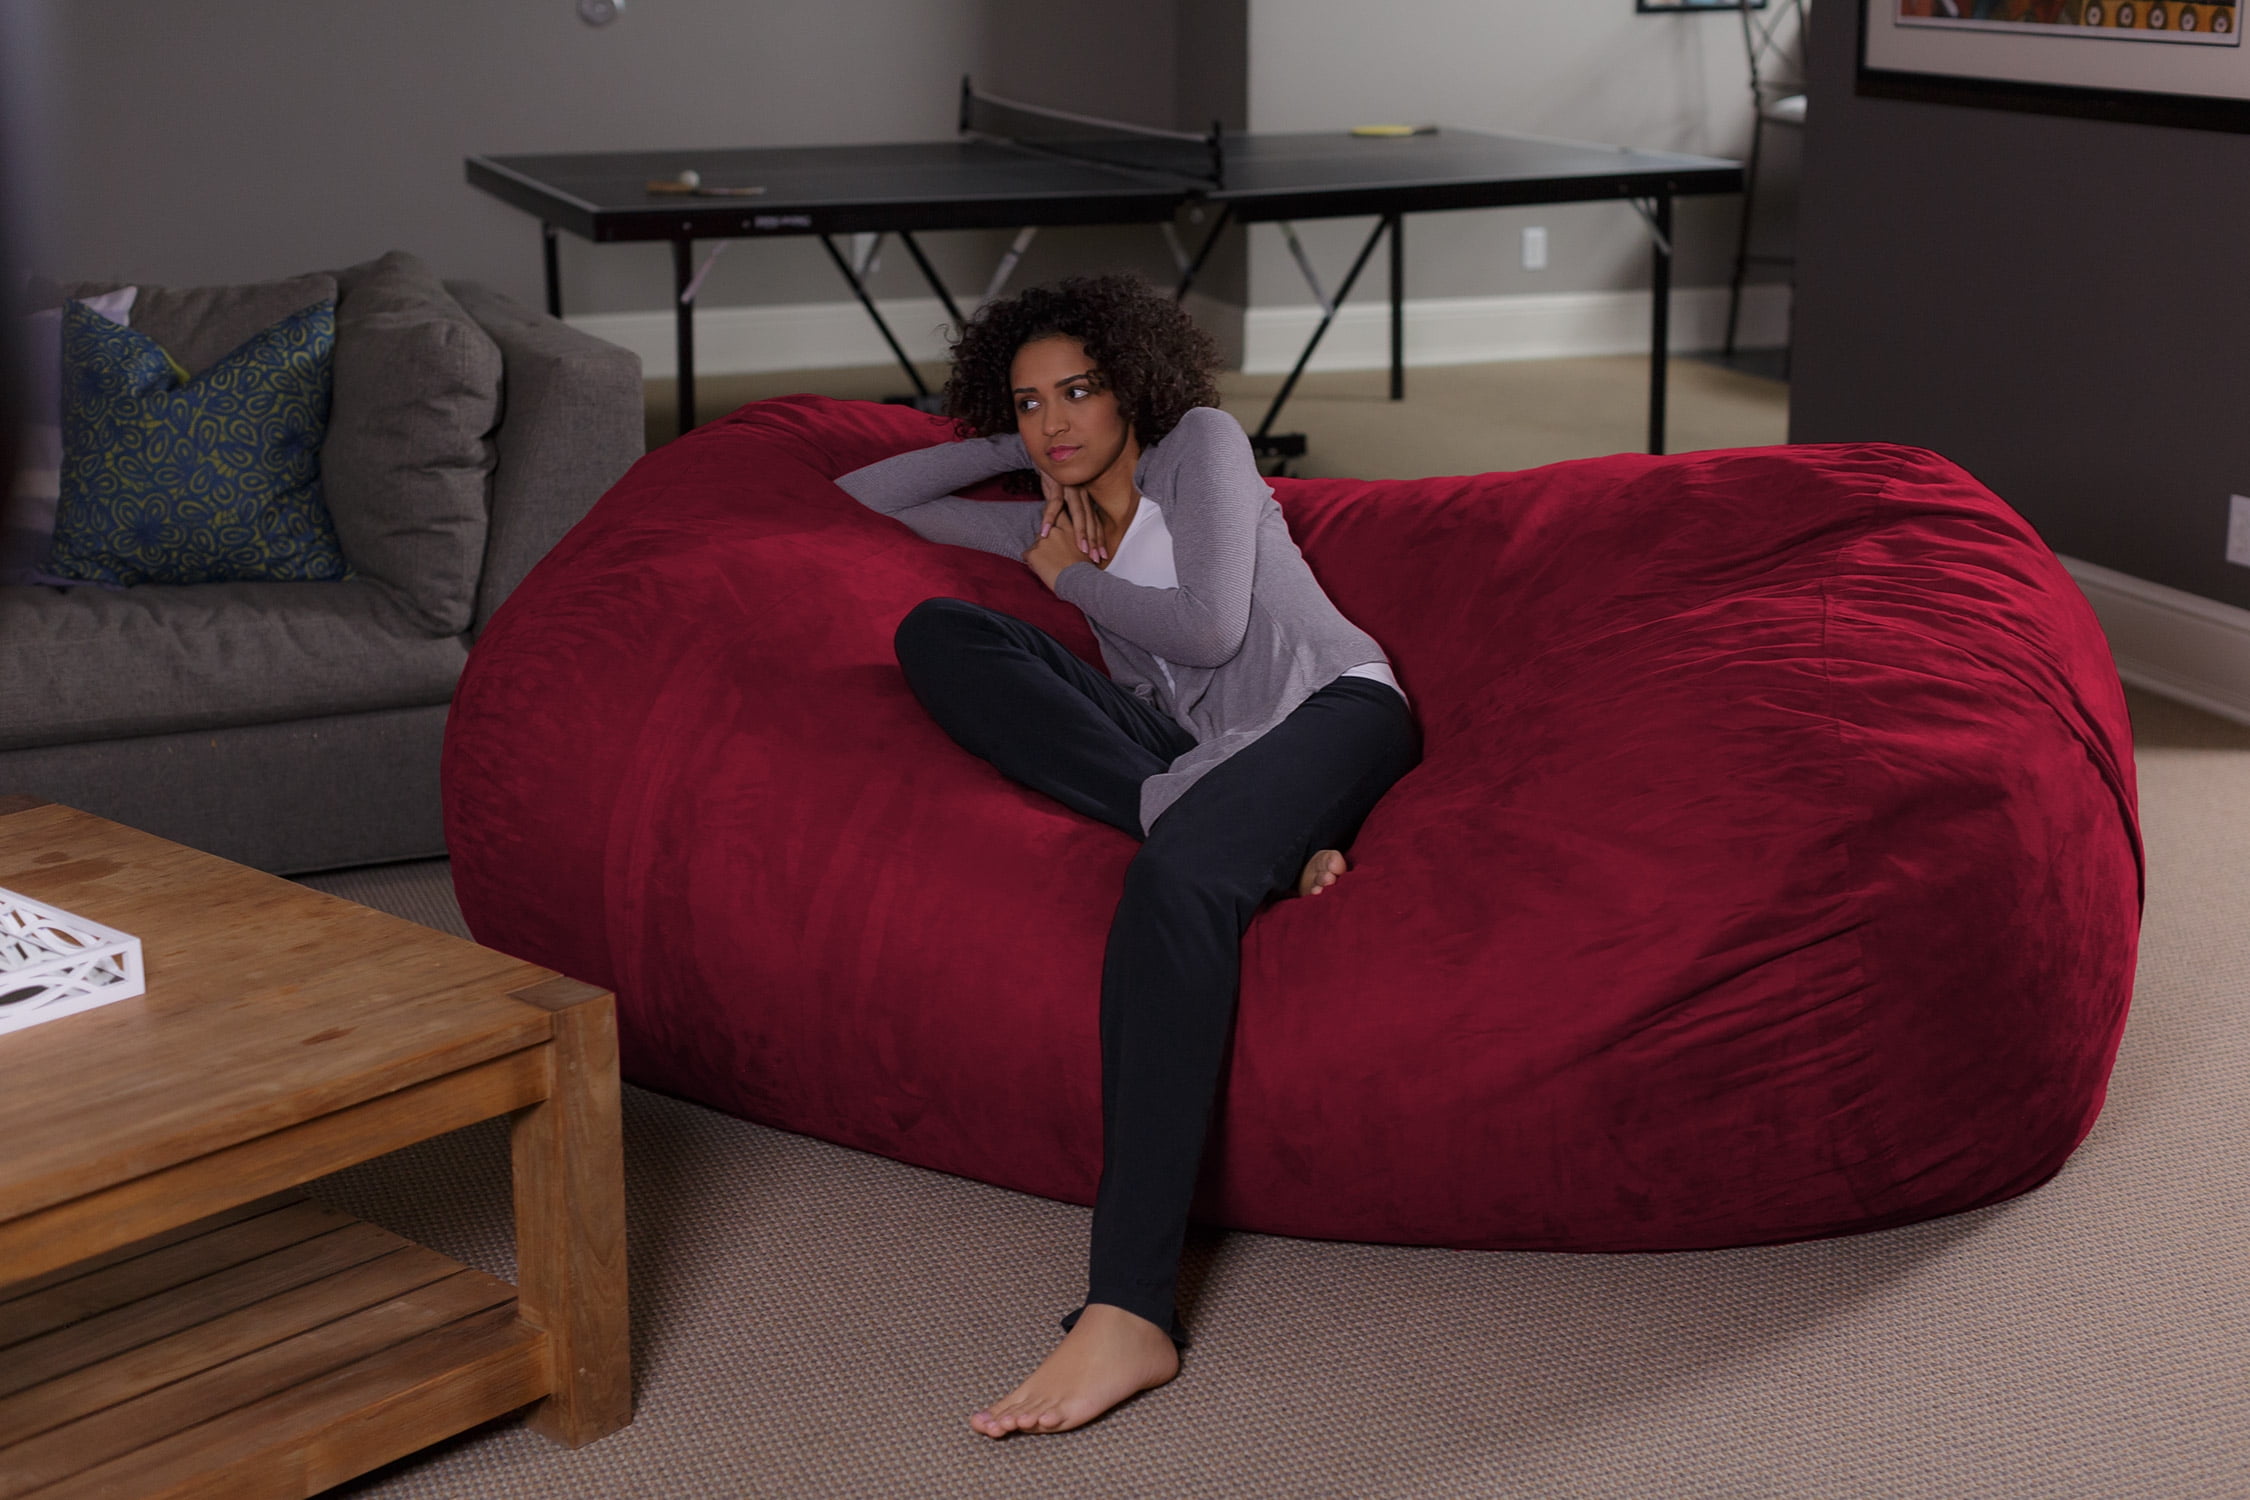 4' Bean Bag Chair with Memory Foam Filling and Washable Cover Charcoal -  Relax Sacks